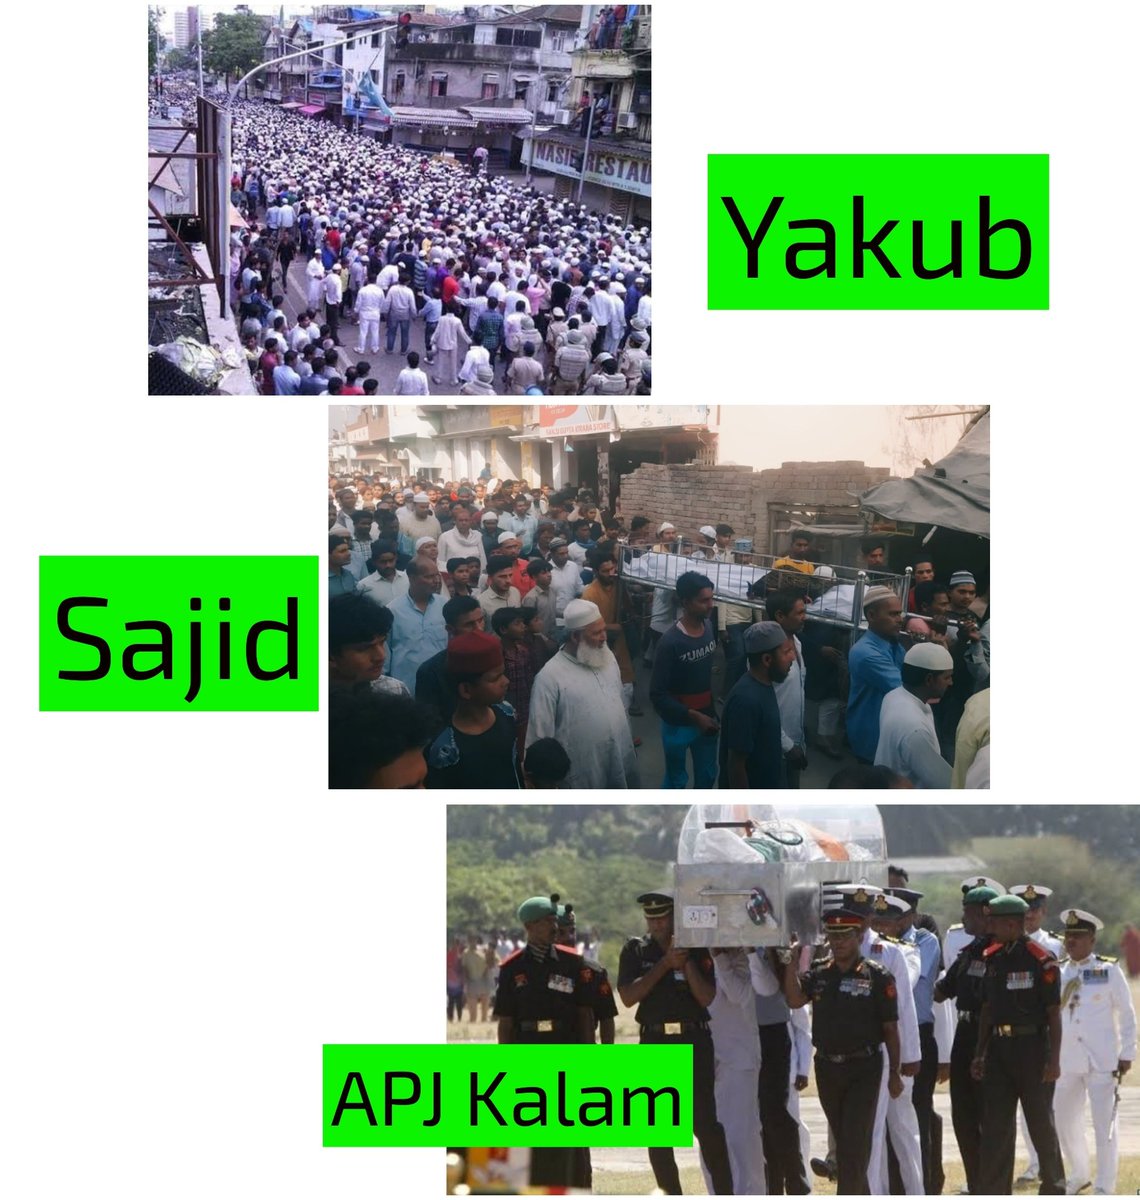 -Funeral of terr0rist Yakub Menon: 3 lakh MusIims participated -Funeral of murd€rer Md Sajid : 30 thousand MusIims participated -Funeral of great man APJ Abdul Kalam : Not even 300 MusIims participated All 3 were MusIims & yet this difference, says a lot about their mindset.